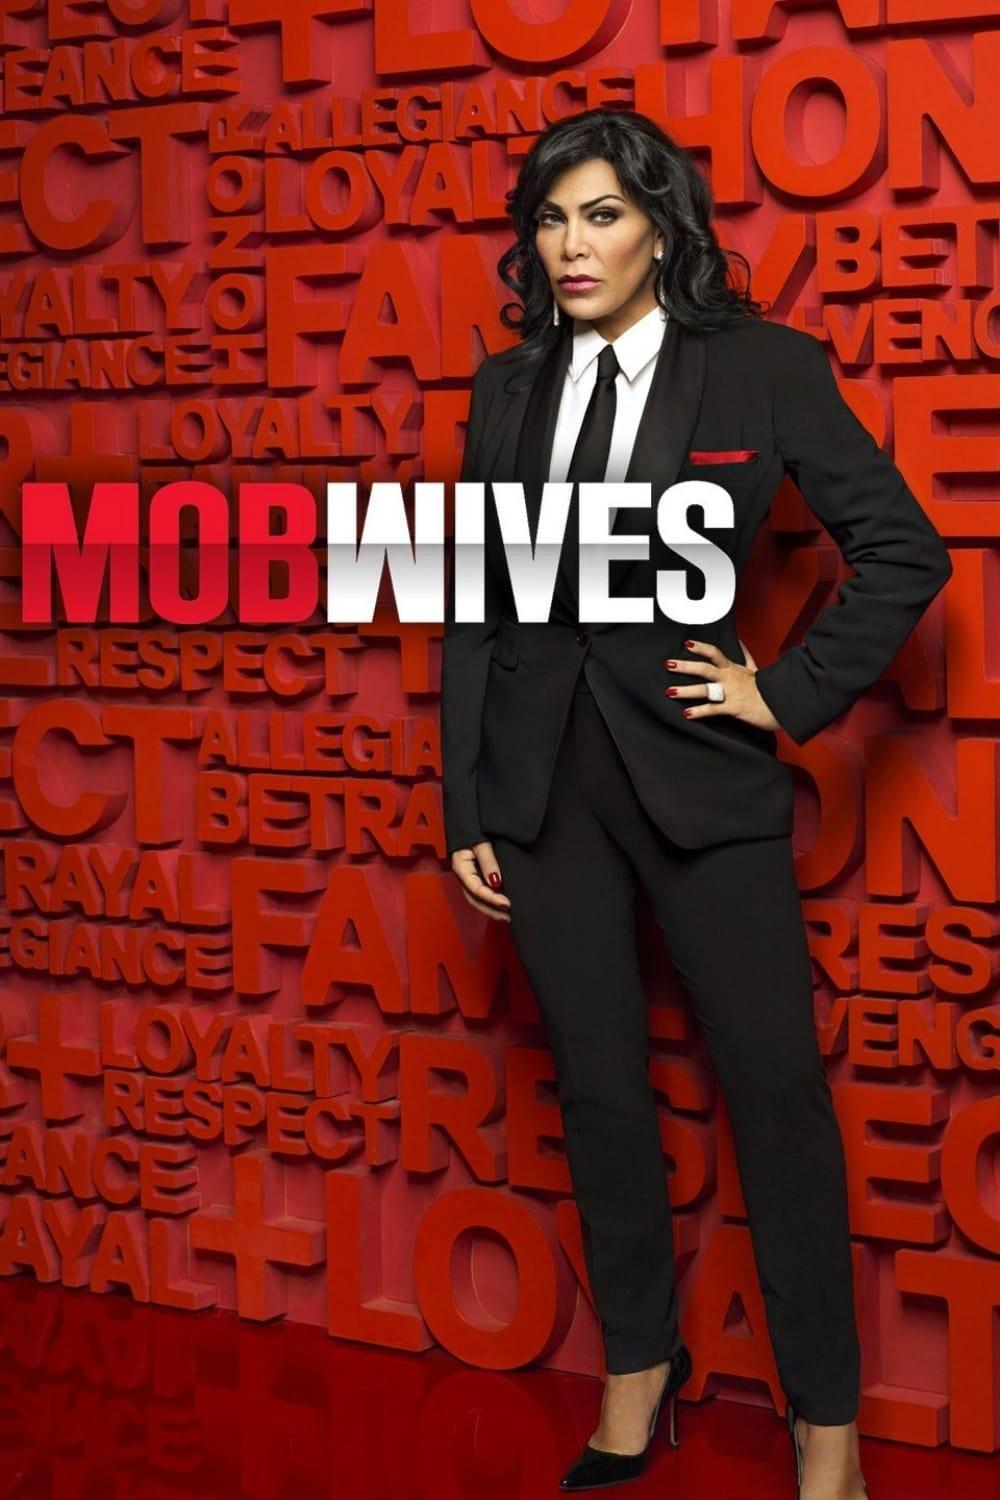 Mob Wives poster